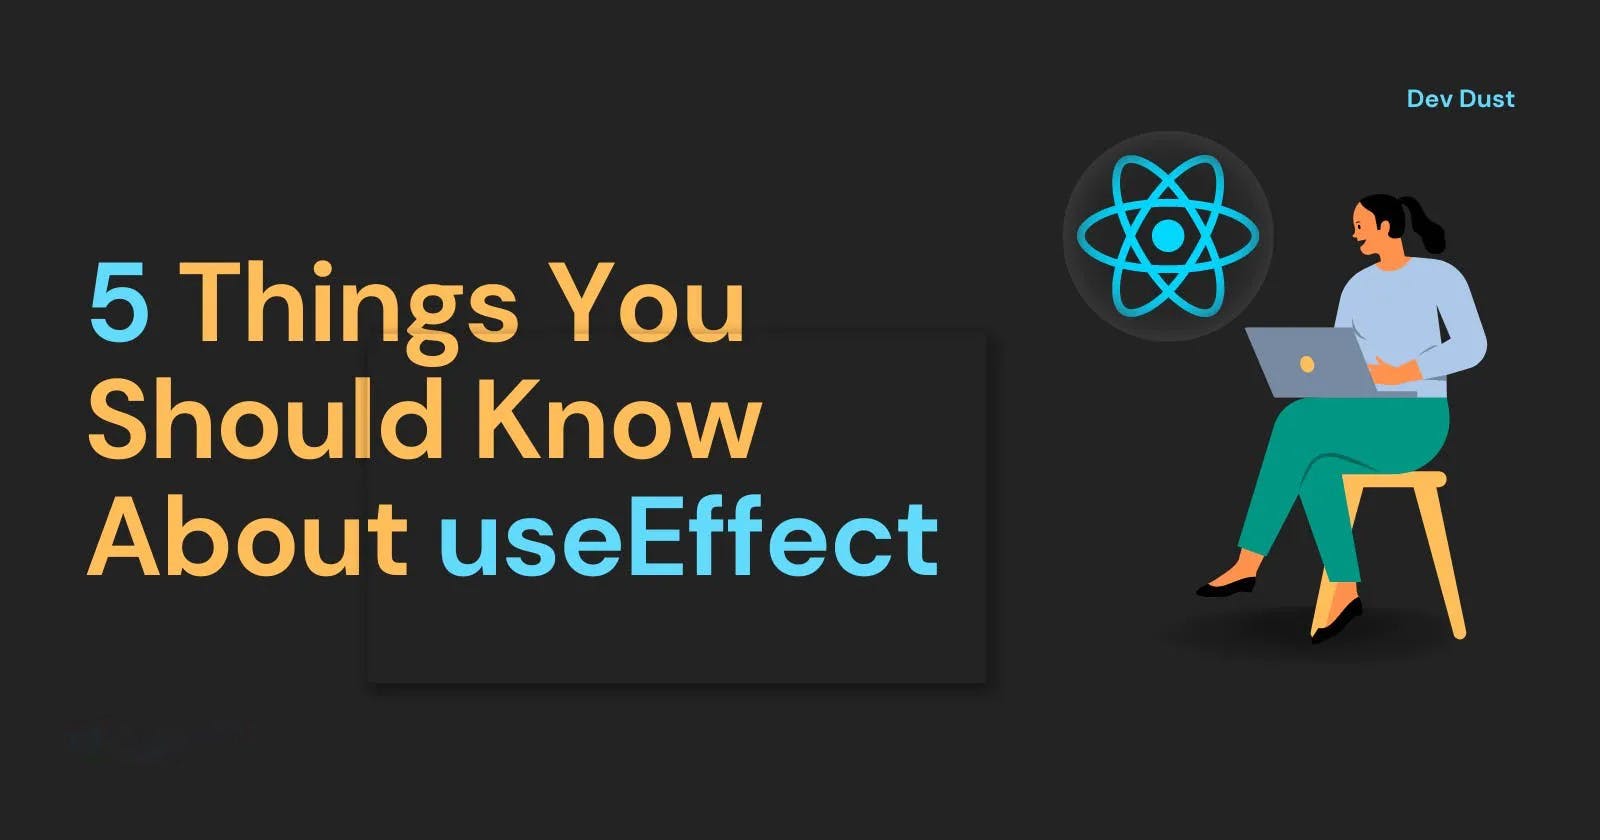 5 Things You Should Know About useEffect